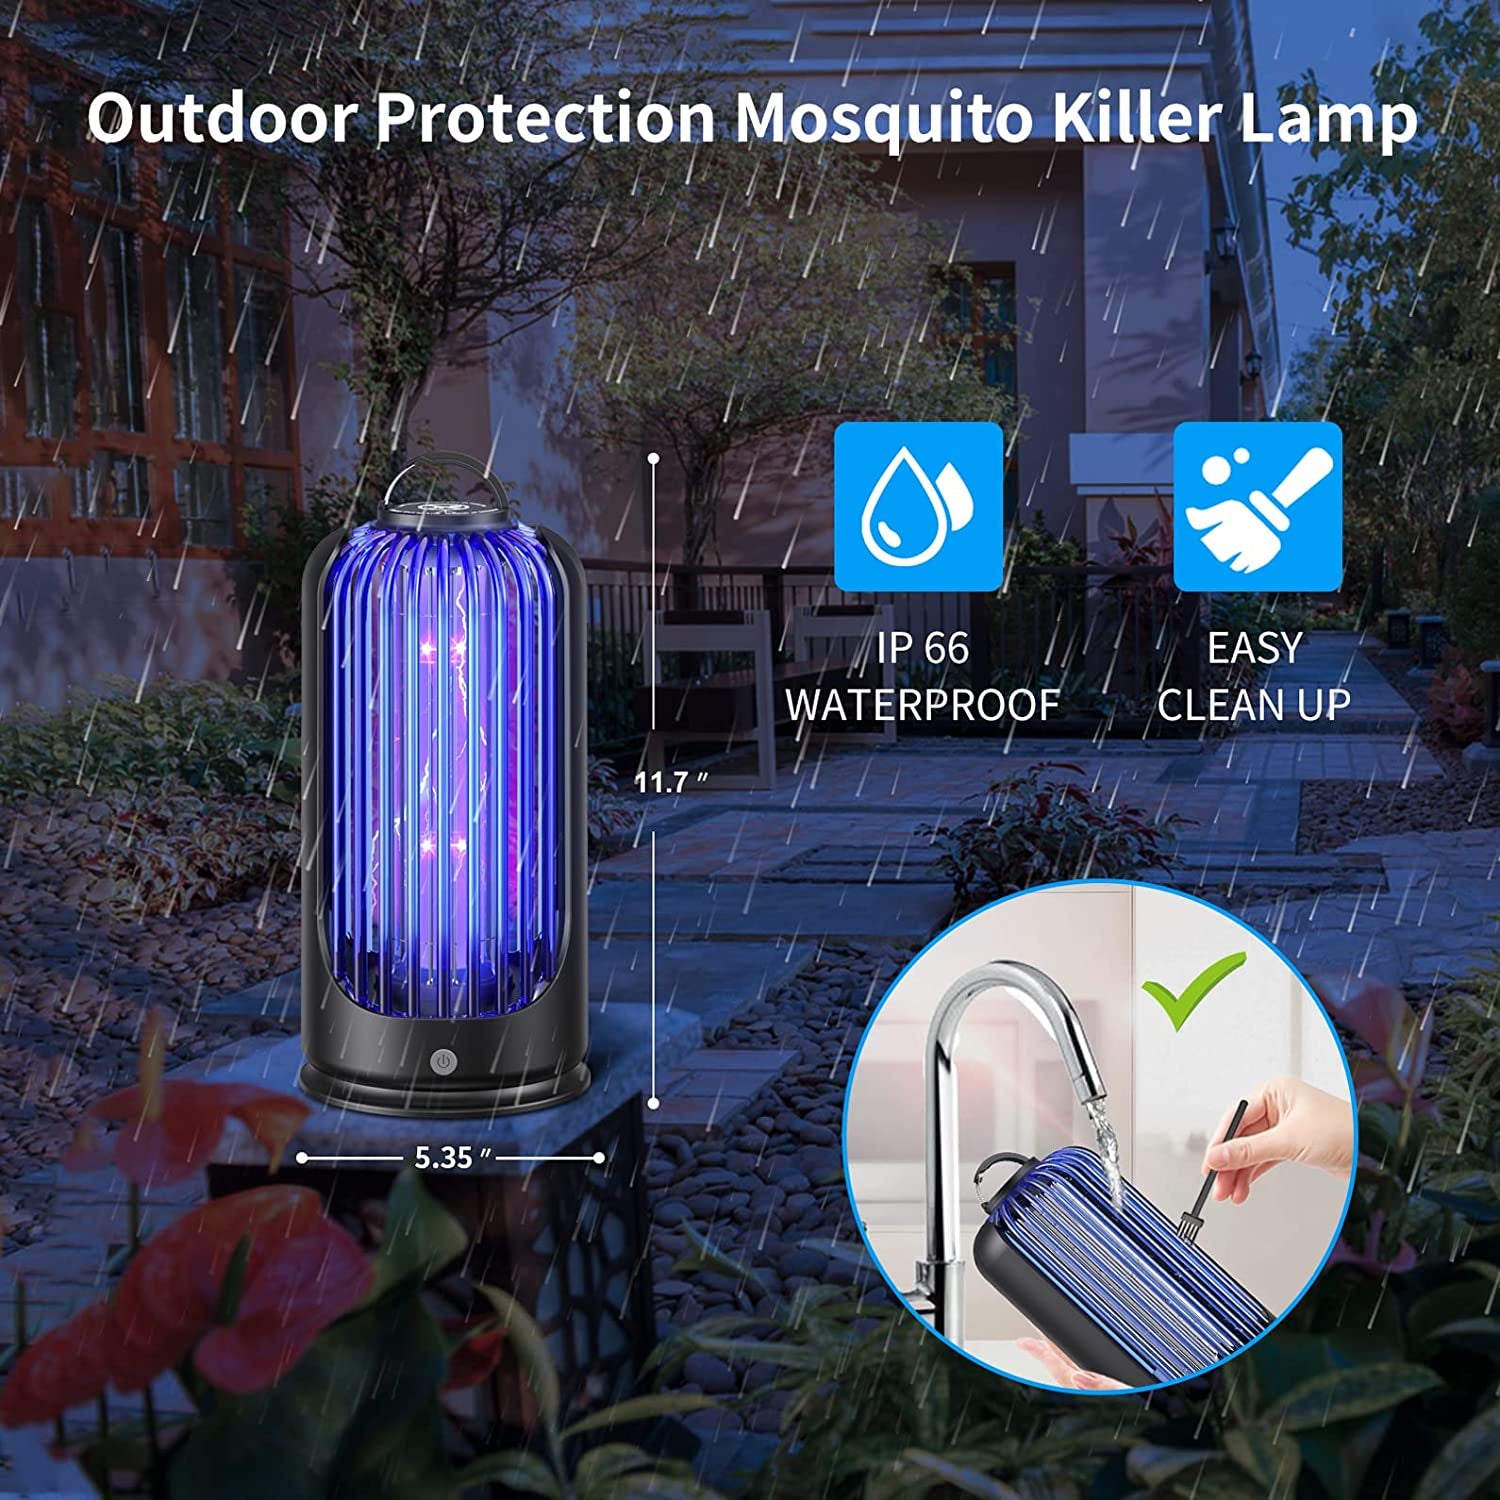 I Thought Indoor Bug Zappers Were Too Bulky and Loud to Use